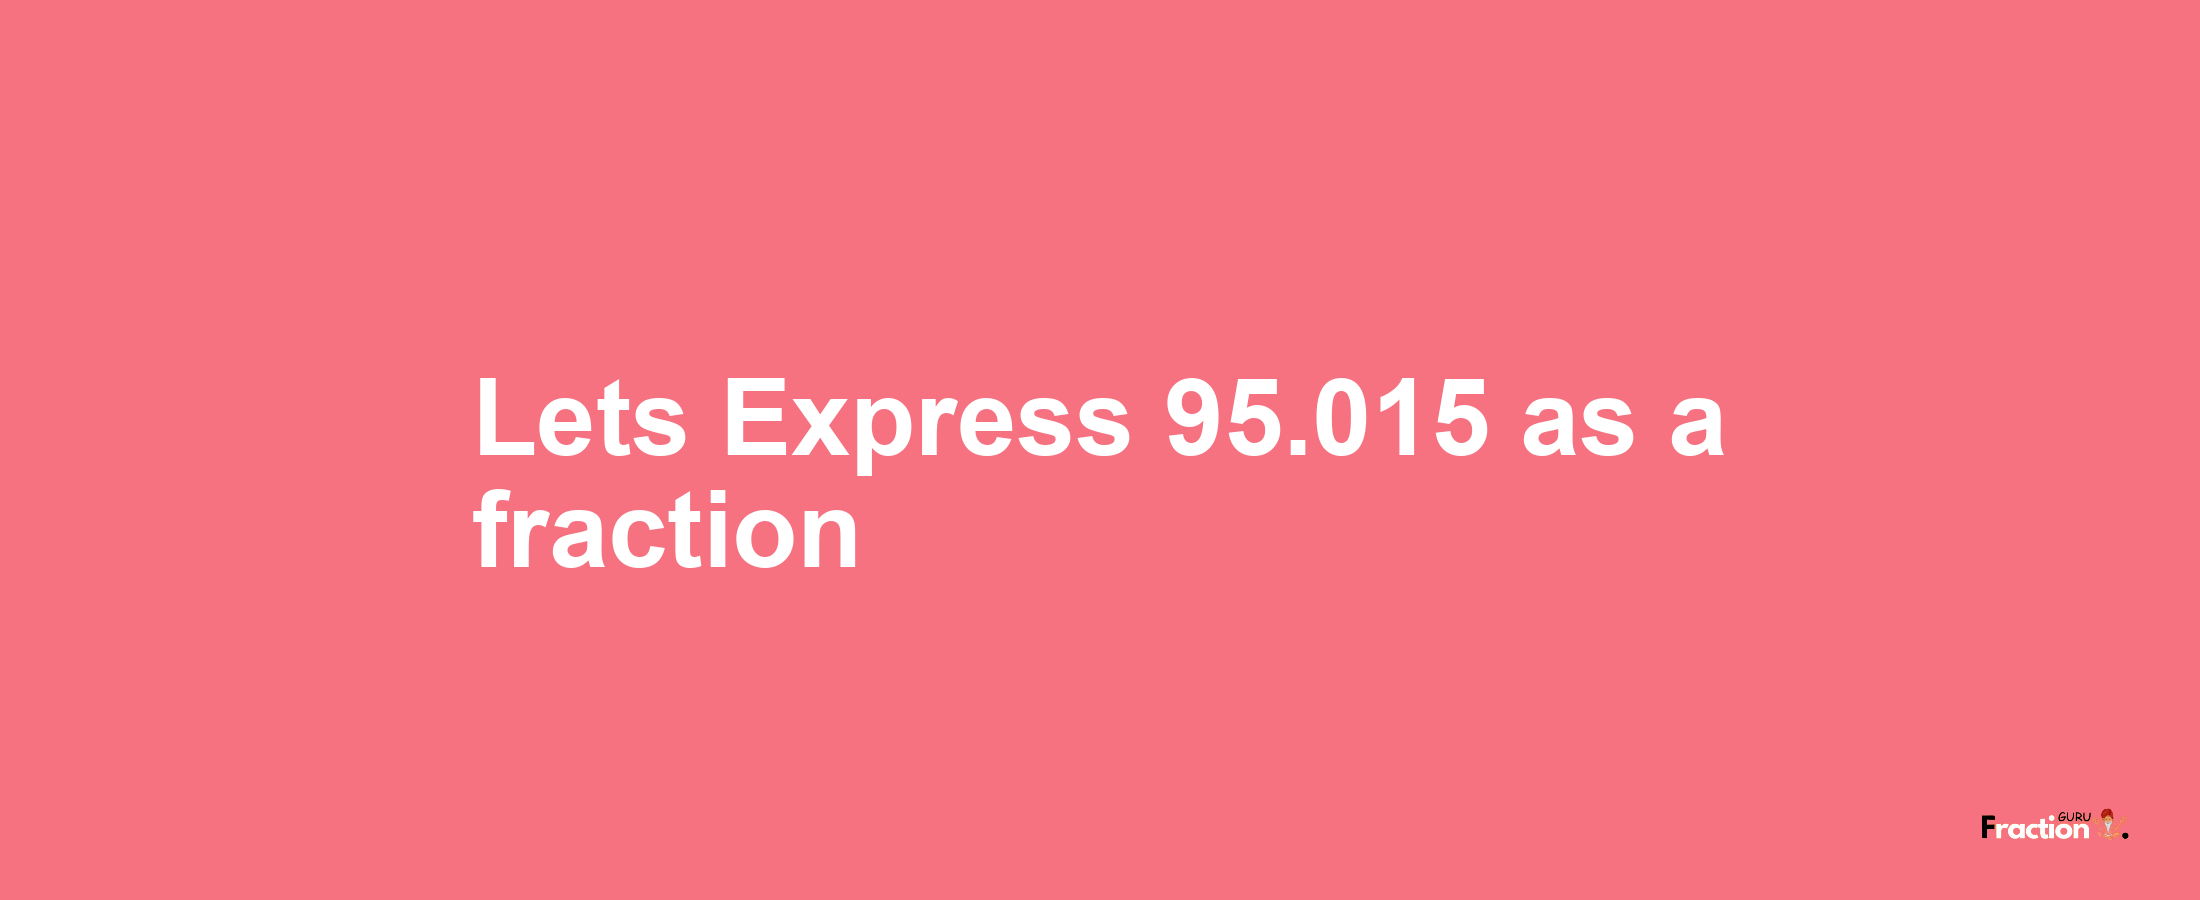 Lets Express 95.015 as afraction